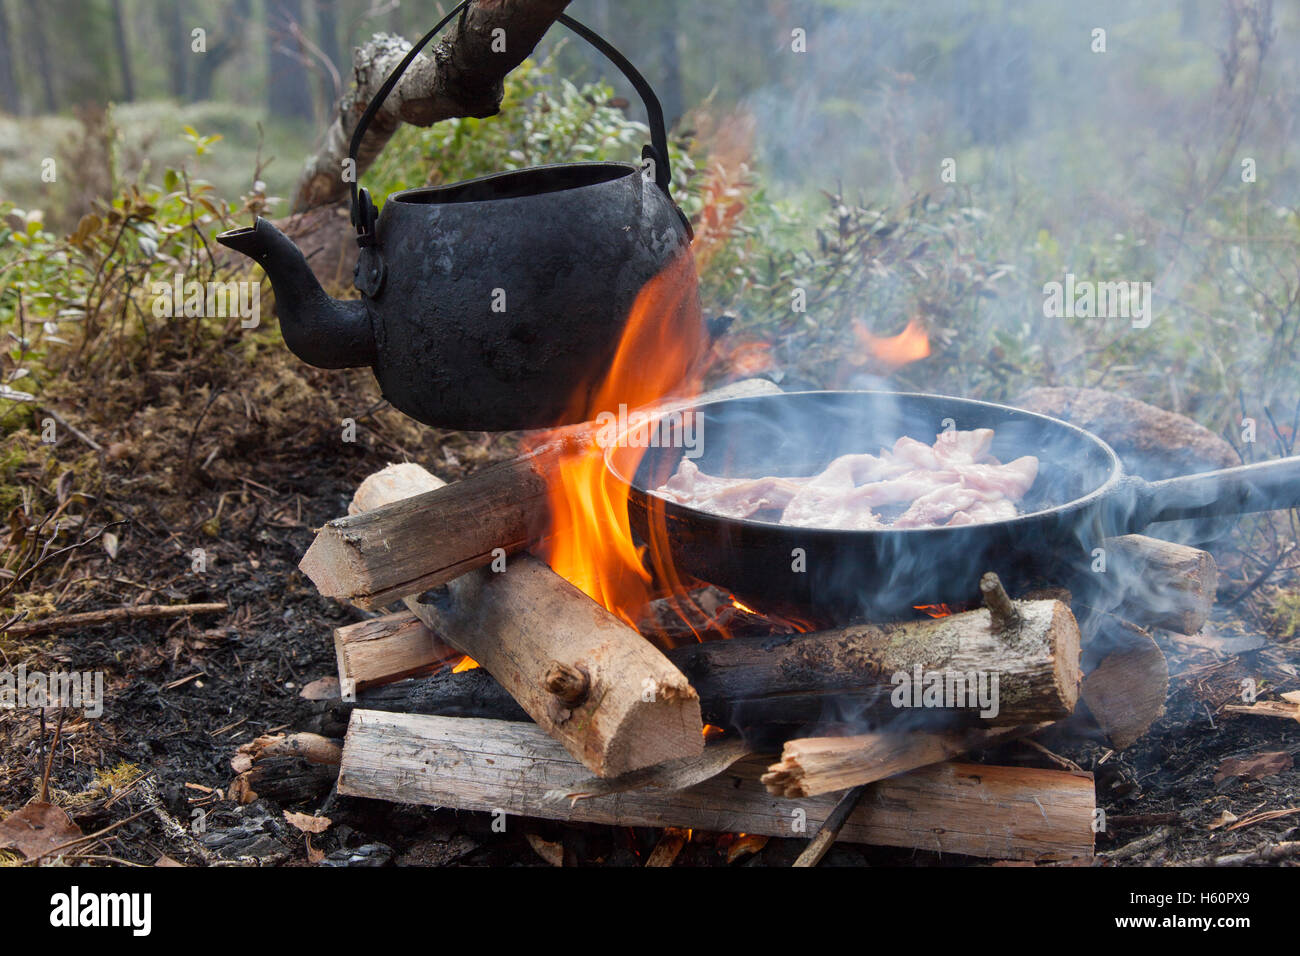 Blackened tin kettle boiling water and pan cooking bacon over flames from campfire during hike in forest Stock Photo